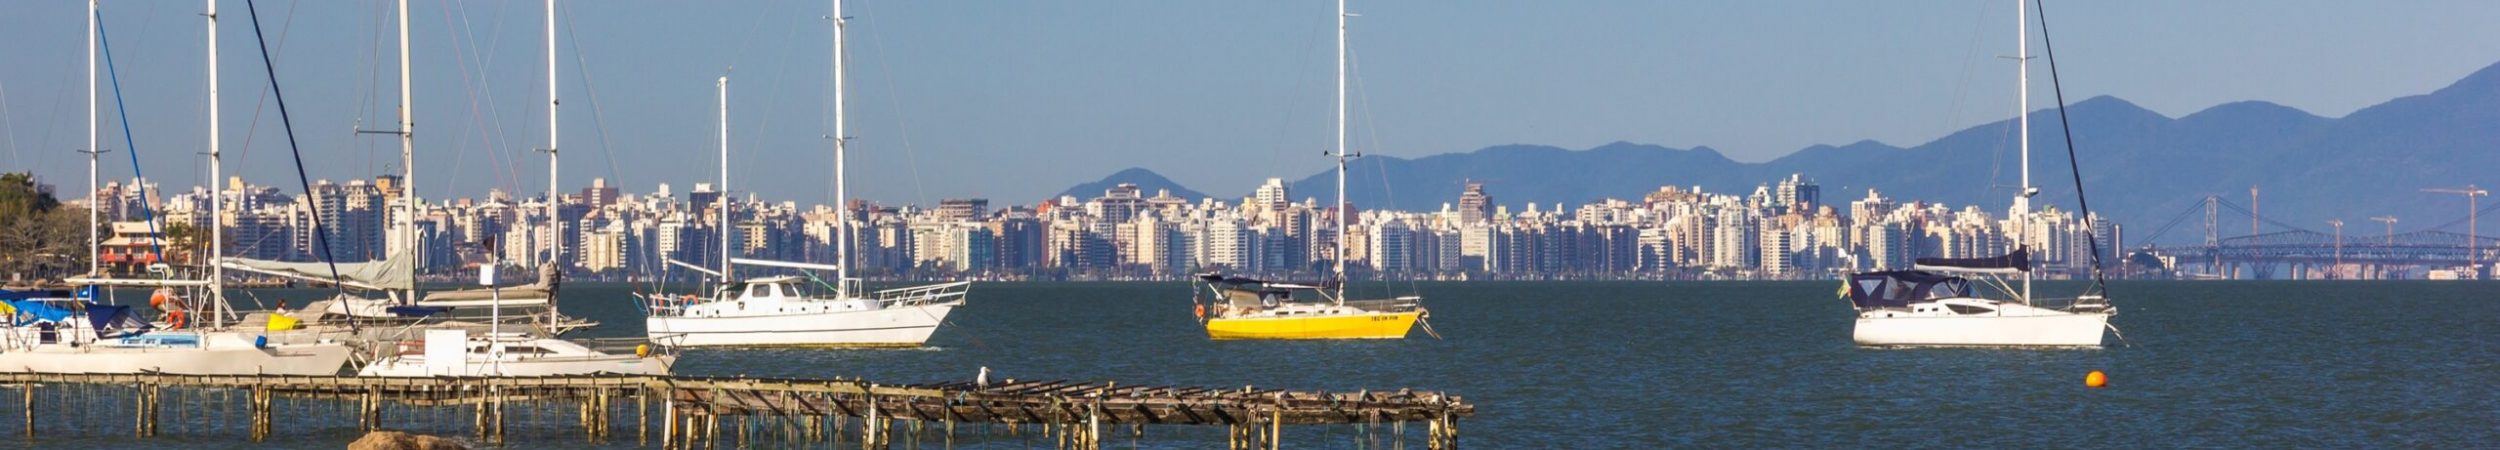 A closeup shot of a bay with sailboats and yachts in Florianopolis, Brazil